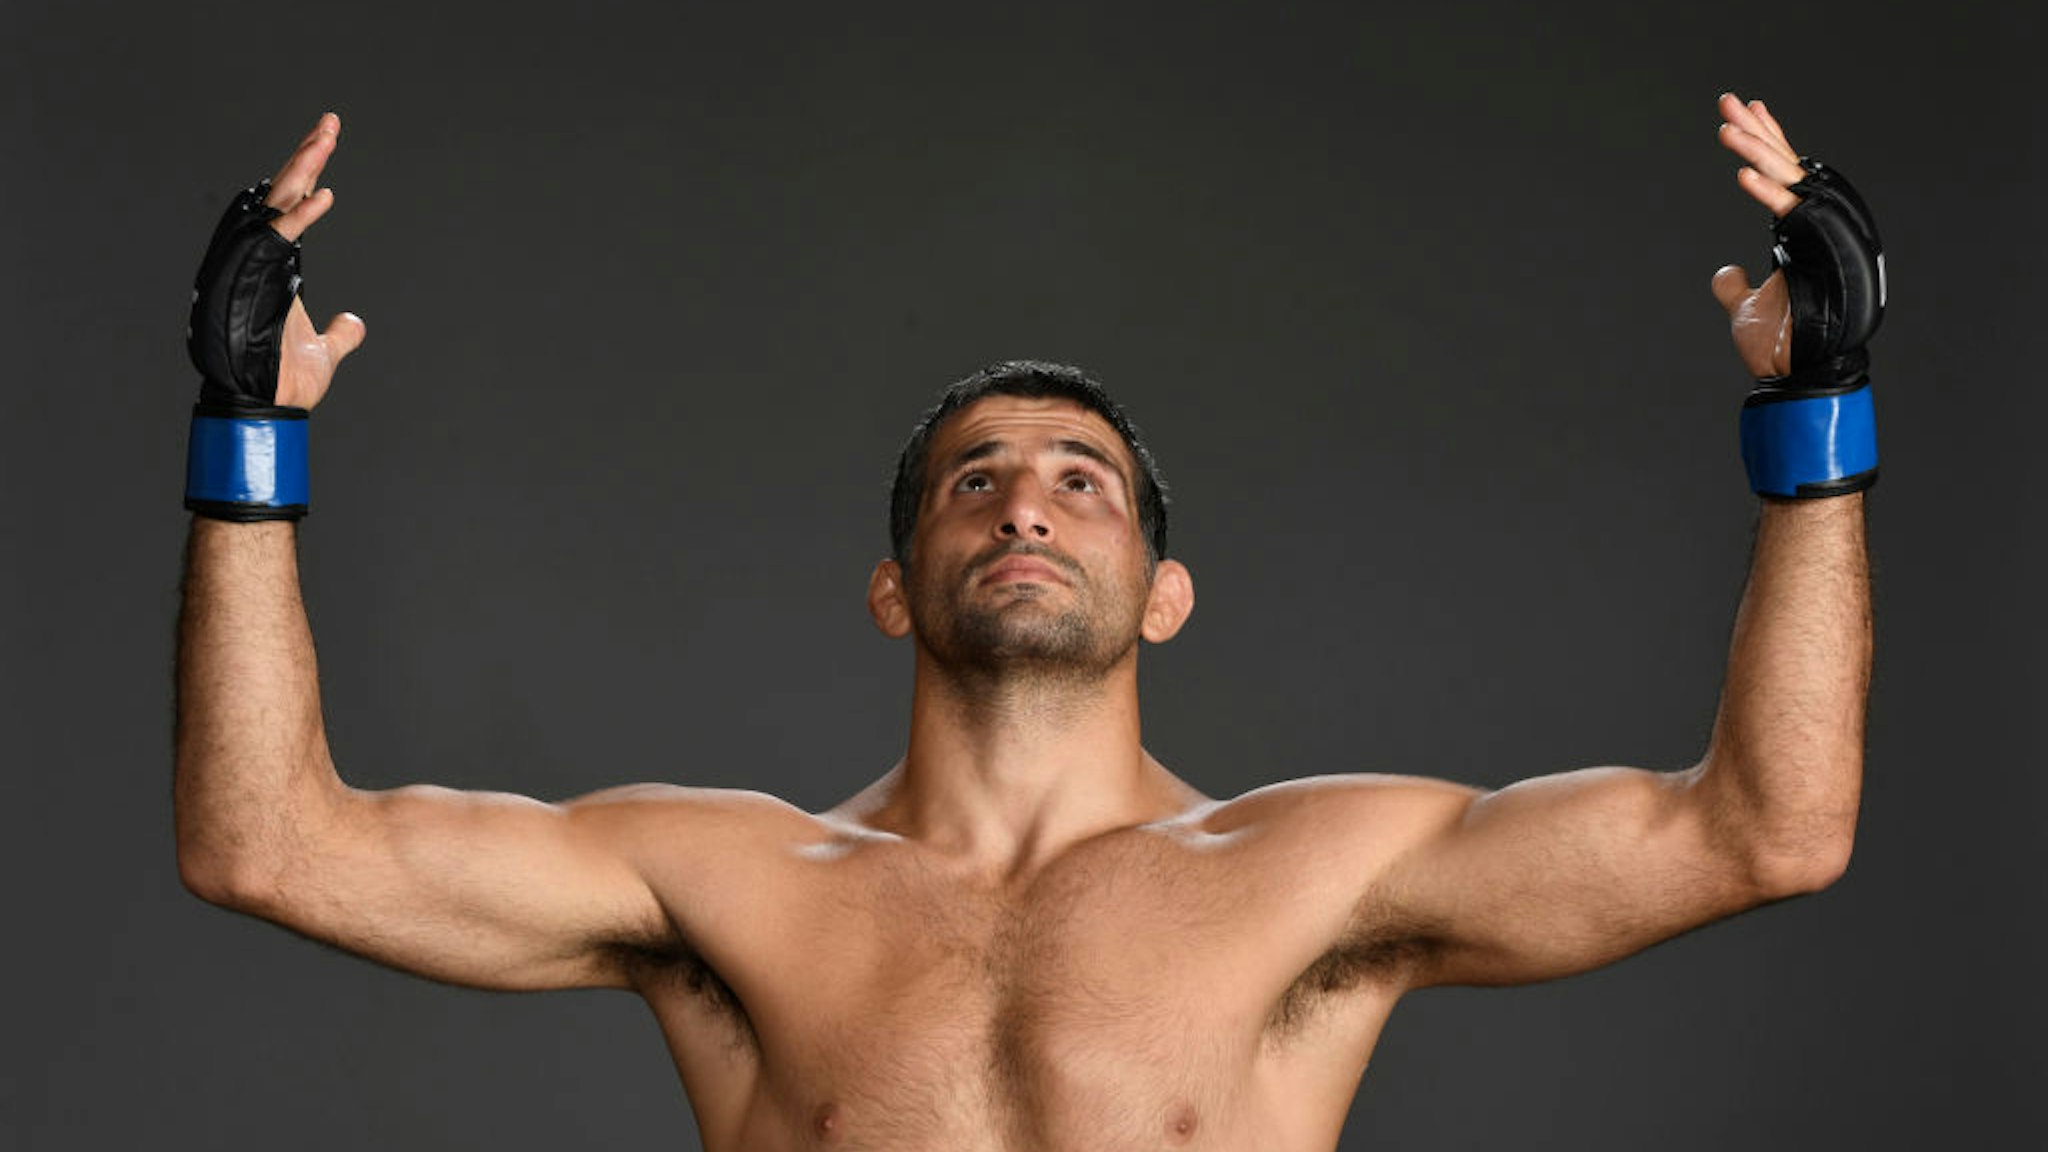 HOUSTON, TEXAS - MAY 15: Beneil Dariush poses for a post fight portrait backstage during the UFC 262 event at Toyota Center on May 15, 2021 in Houston, Texas. (Photo by Mike Roach/Zuffa LLC)